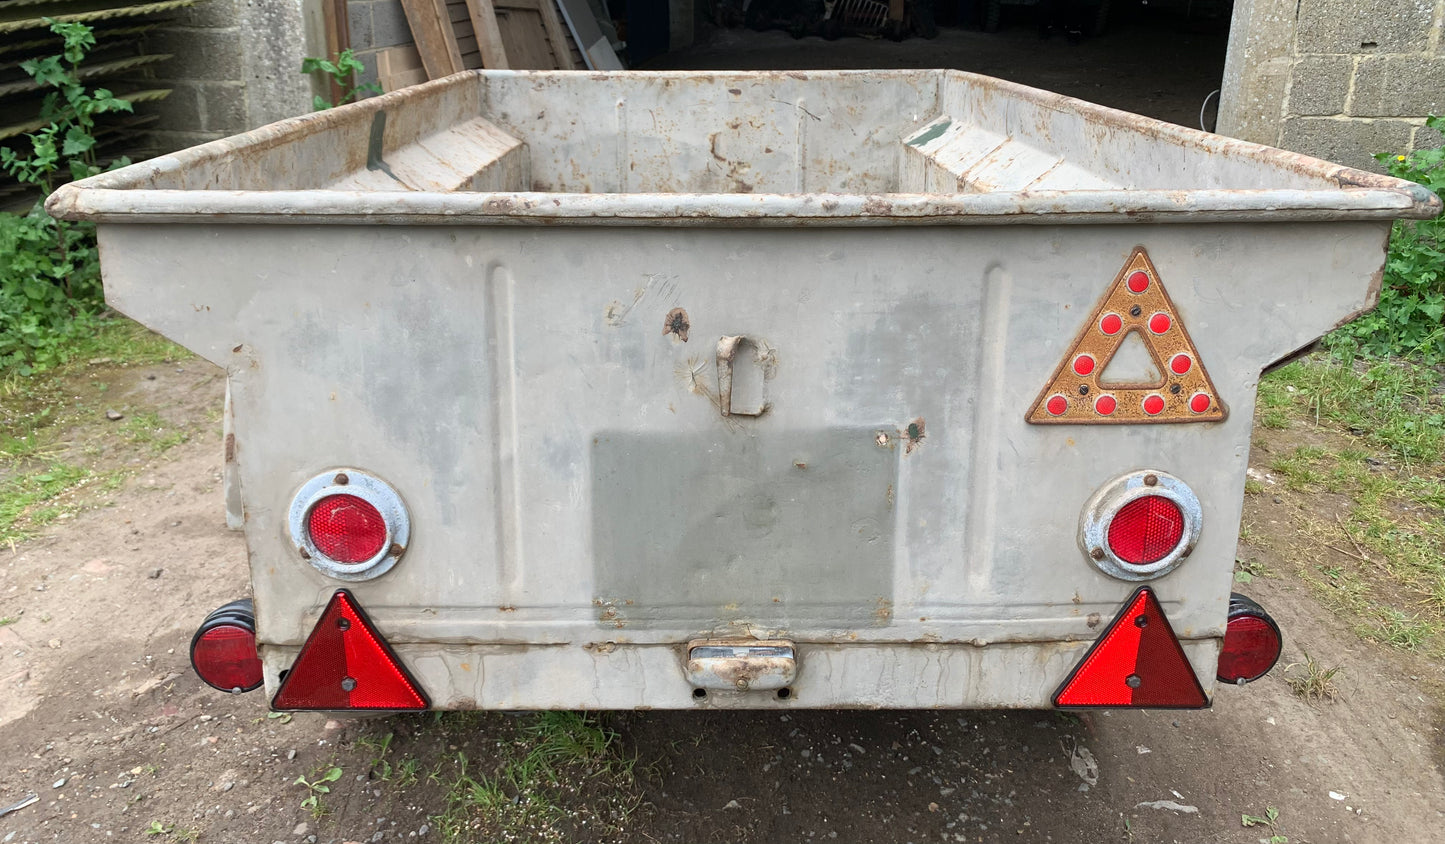 WW2 1943 Willys Trailer owned by same family since 1947.